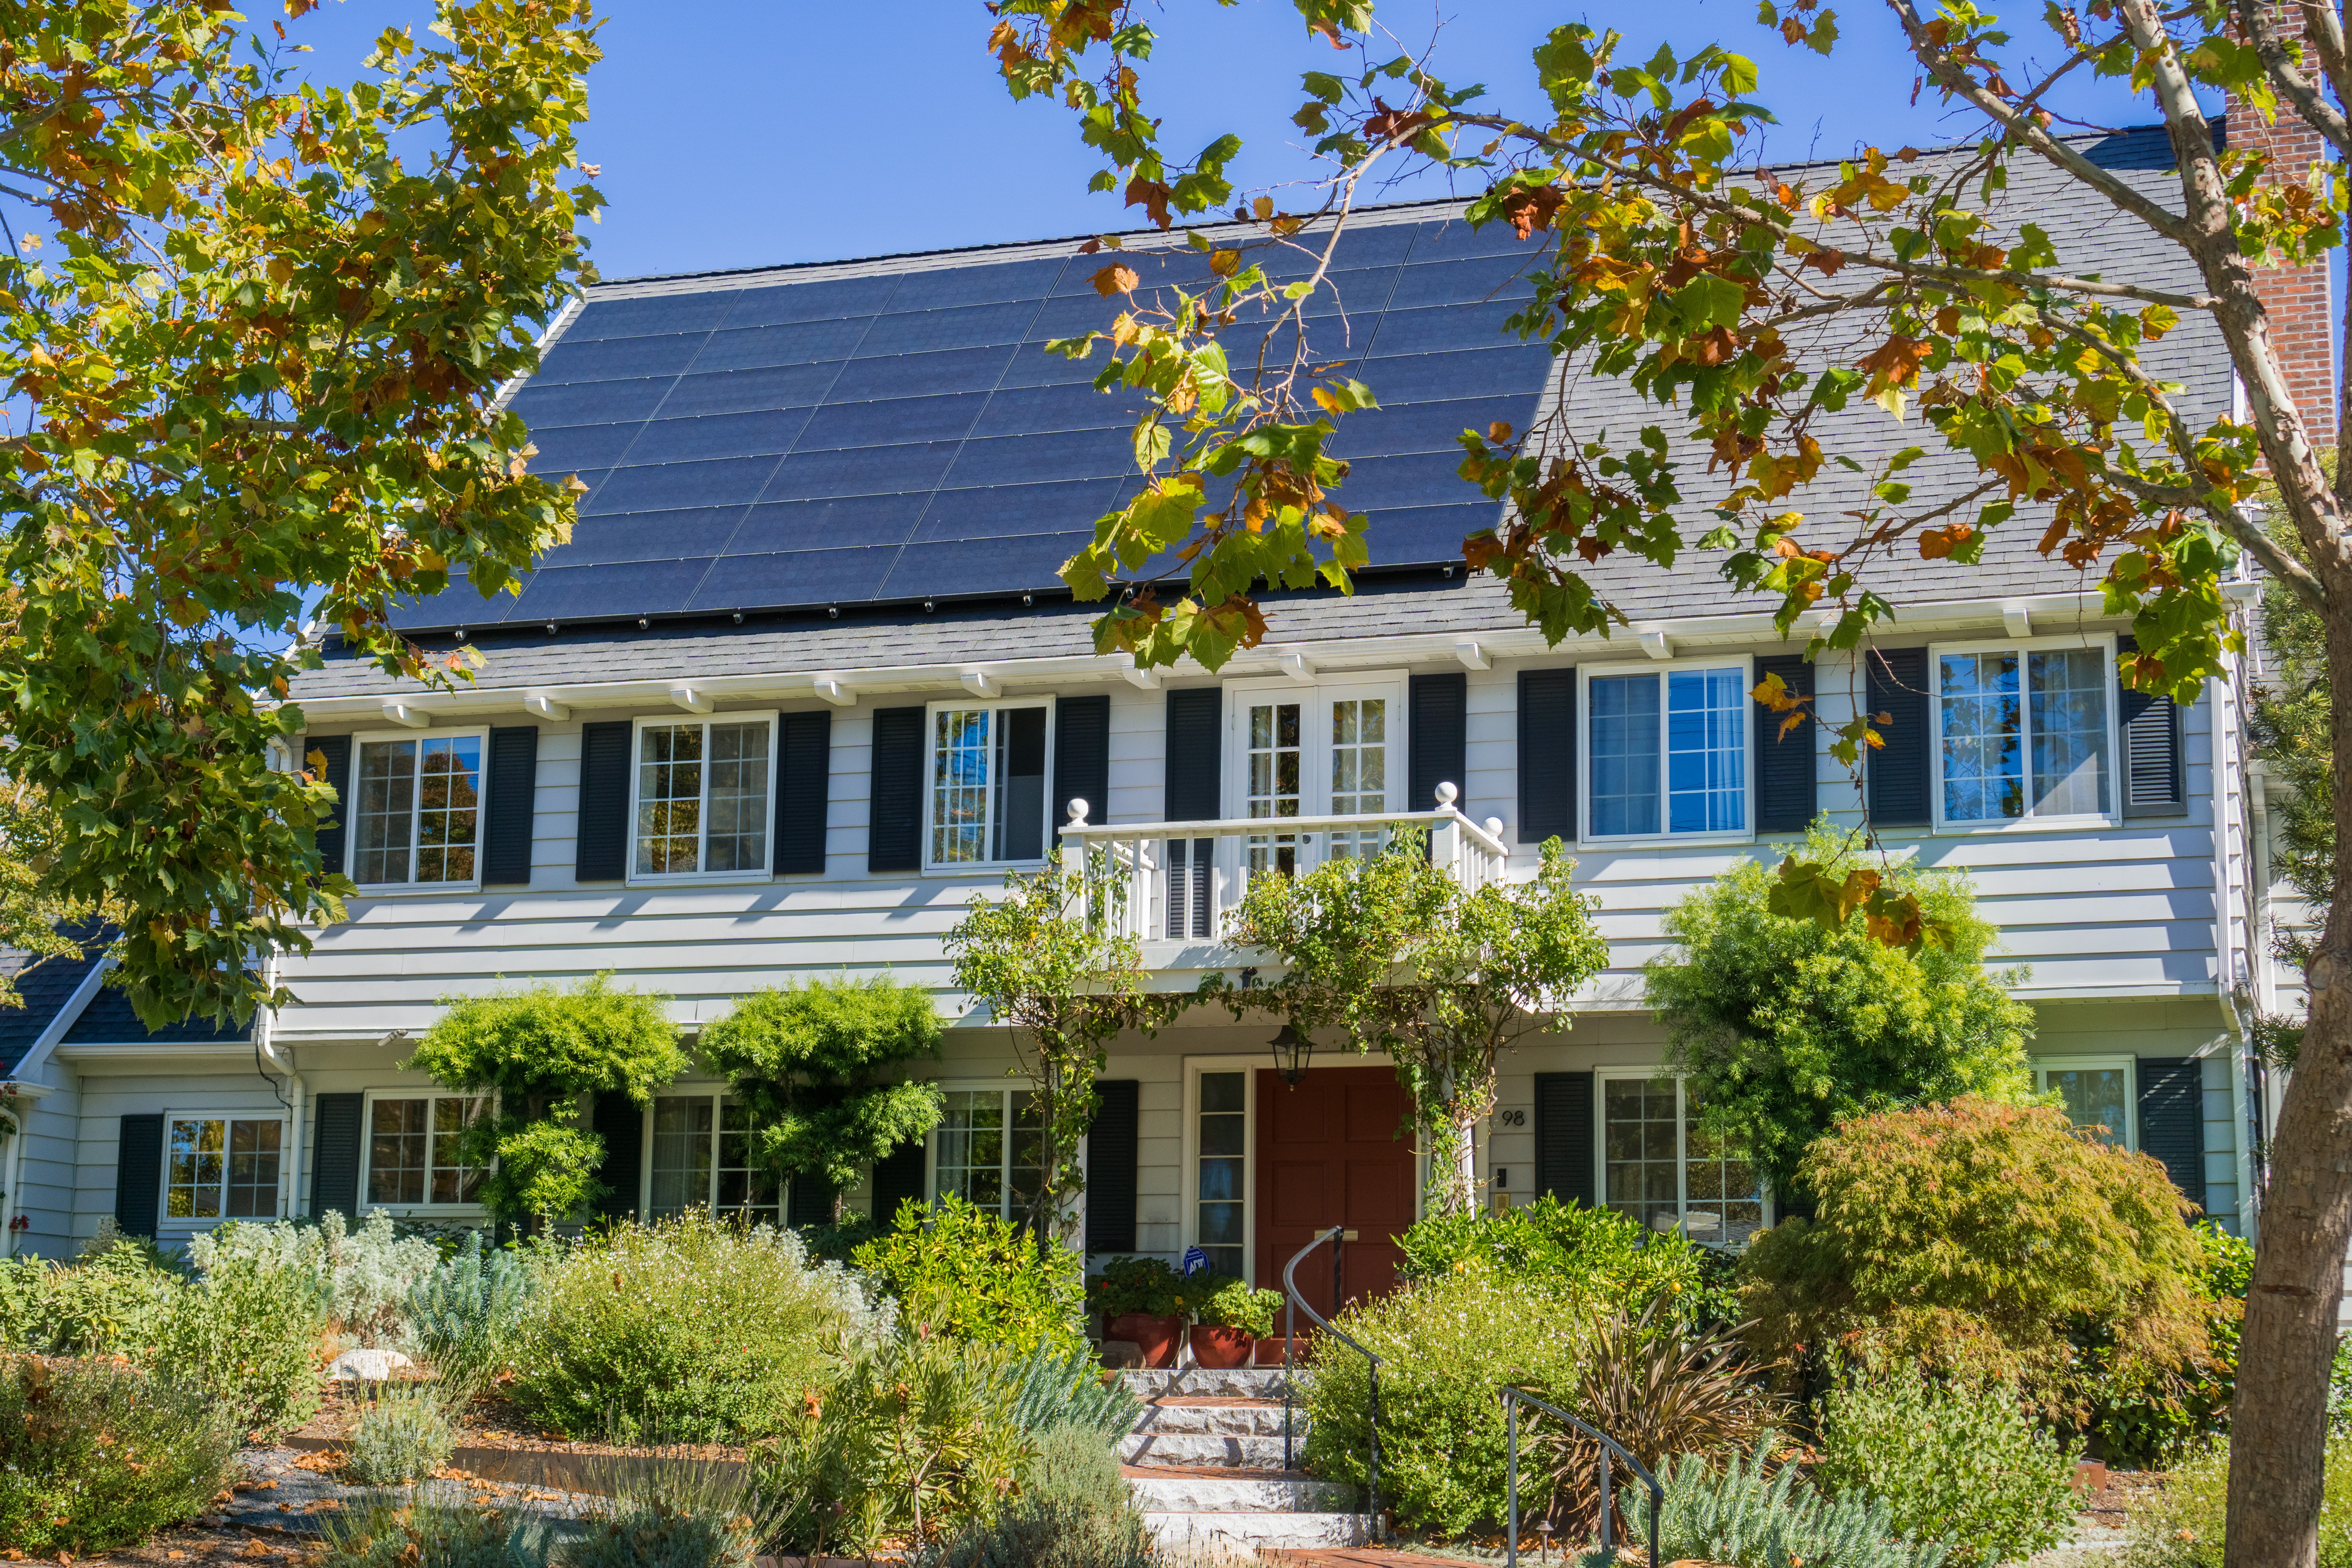 House with solar panels on the roof in a residential neighborhoo